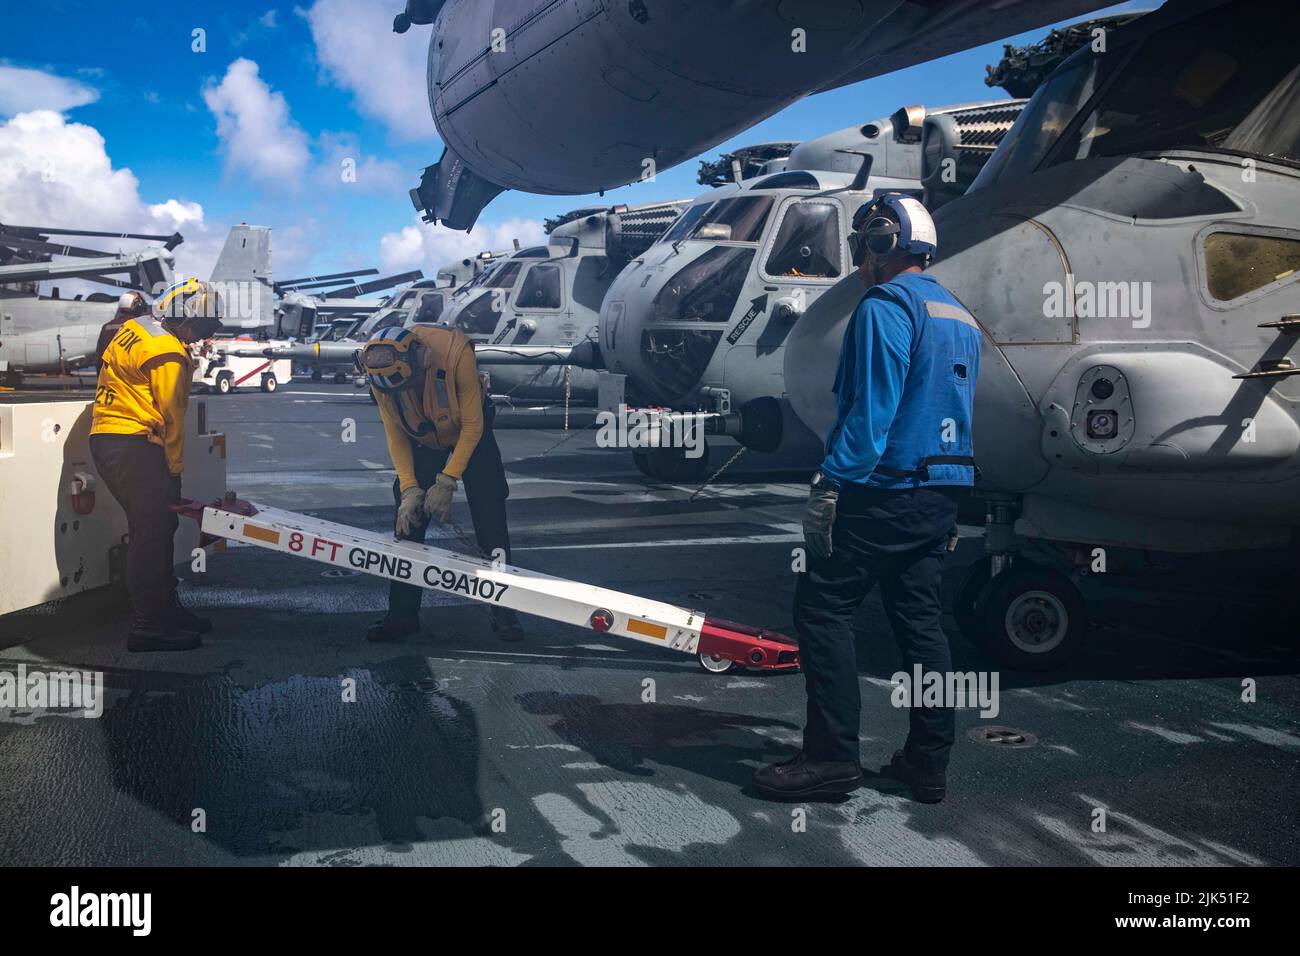 220728-N-VJ326-2216 PACIFIC OCEAN (July 28, 2022) – Sailors attach a spotting dolly to an MV-22 Osprey tiltrotor aircraft assigned to Marine Medium Tiltrotor Squadron (VMM) 262 (Reinforced) on the flight deck aboard amphibious assault carrier USS Tripoli (LHA 7), July 28, 2022. Tripoli is operating in the U.S. 7th Fleet area of operations to enhance interoperability with allies and partners and serve as a ready response force to defend peace and maintain stability in the Indo-Pacific region. (U.S. Navy photo by Mass Communication Specialist 2nd Class Malcolm Kelley) Stock Photo